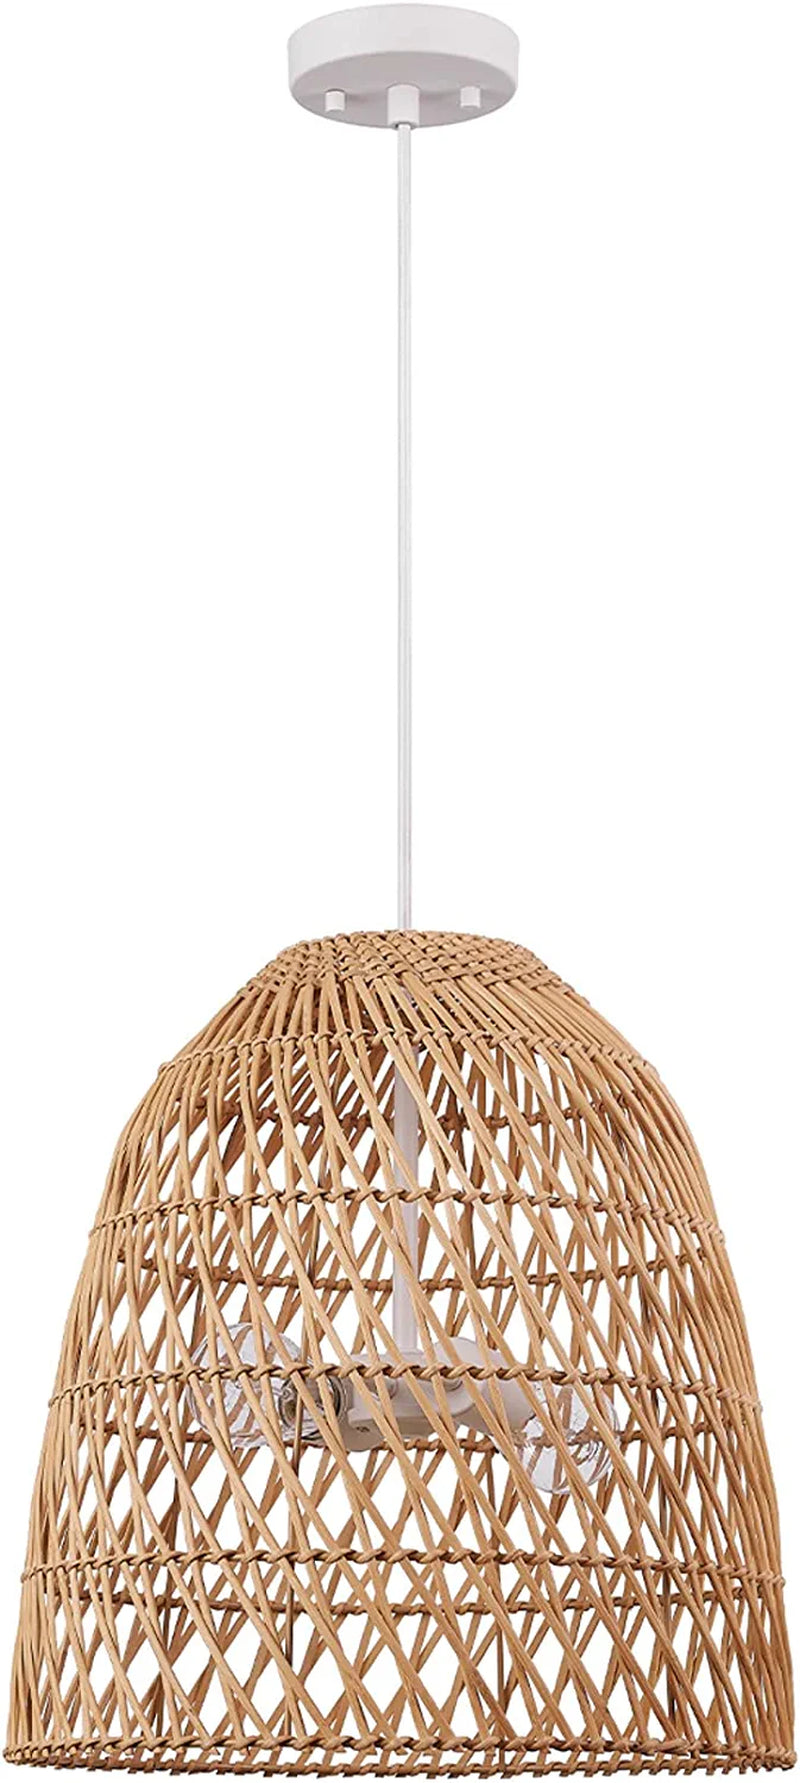 Globe Electric 61090 1-Light Pendant Light, Light Twine Shade, White Socket, White Cloth Hanging Cord, E26 Base Socket, Kitchen Island, Pendant Light Fixture, Adjustable Height, Home Décor Lighting Home & Garden > Lighting > Lighting Fixtures Globe Electric Galen Without Bulb 